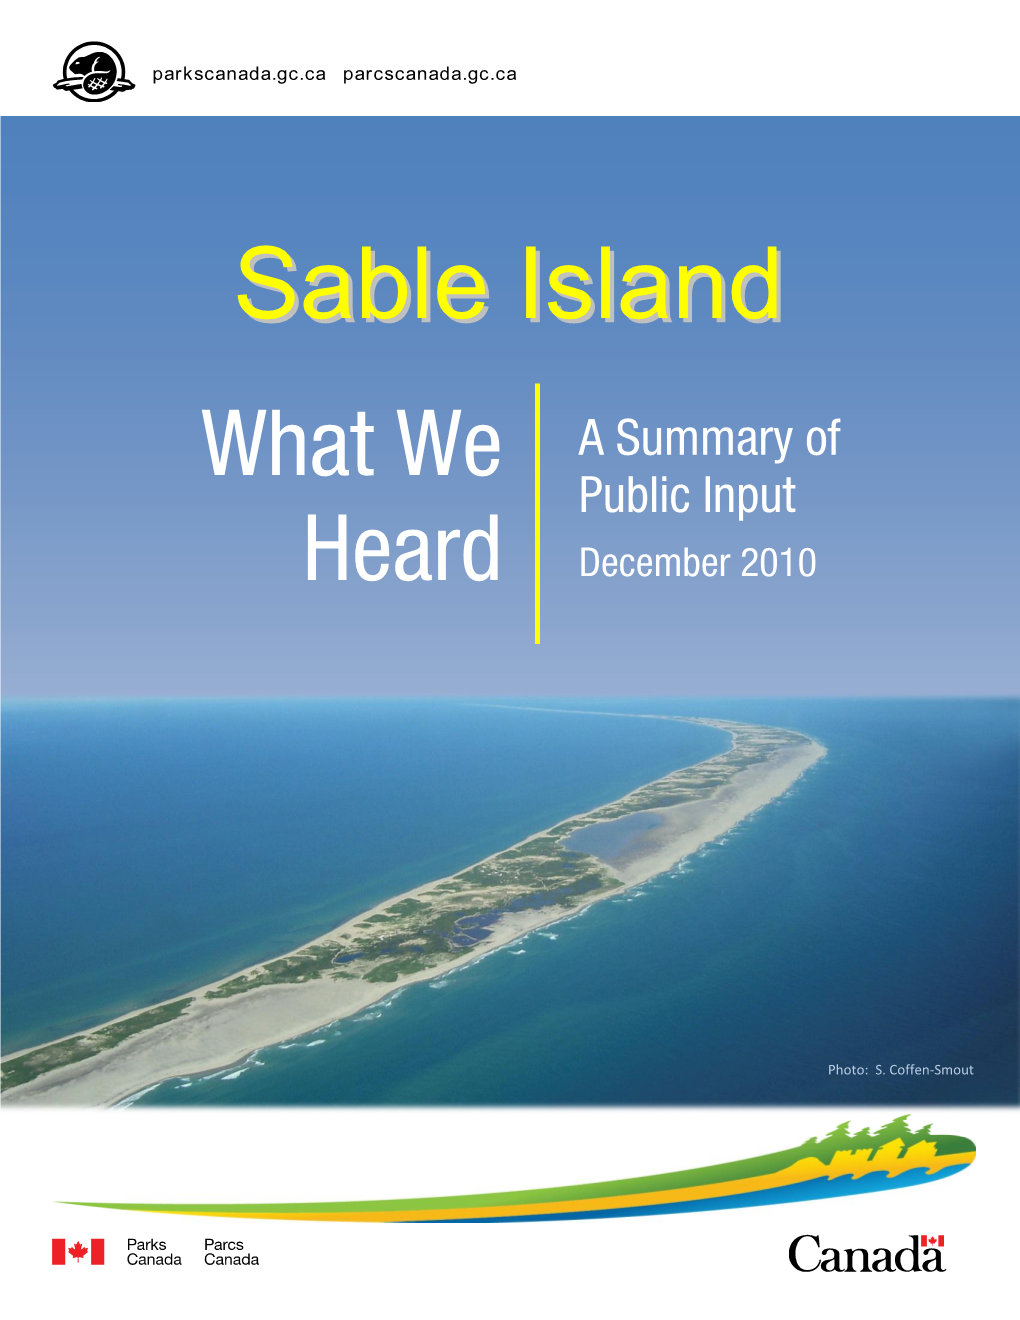 Sable Island As the Mandate of Parks a National Park